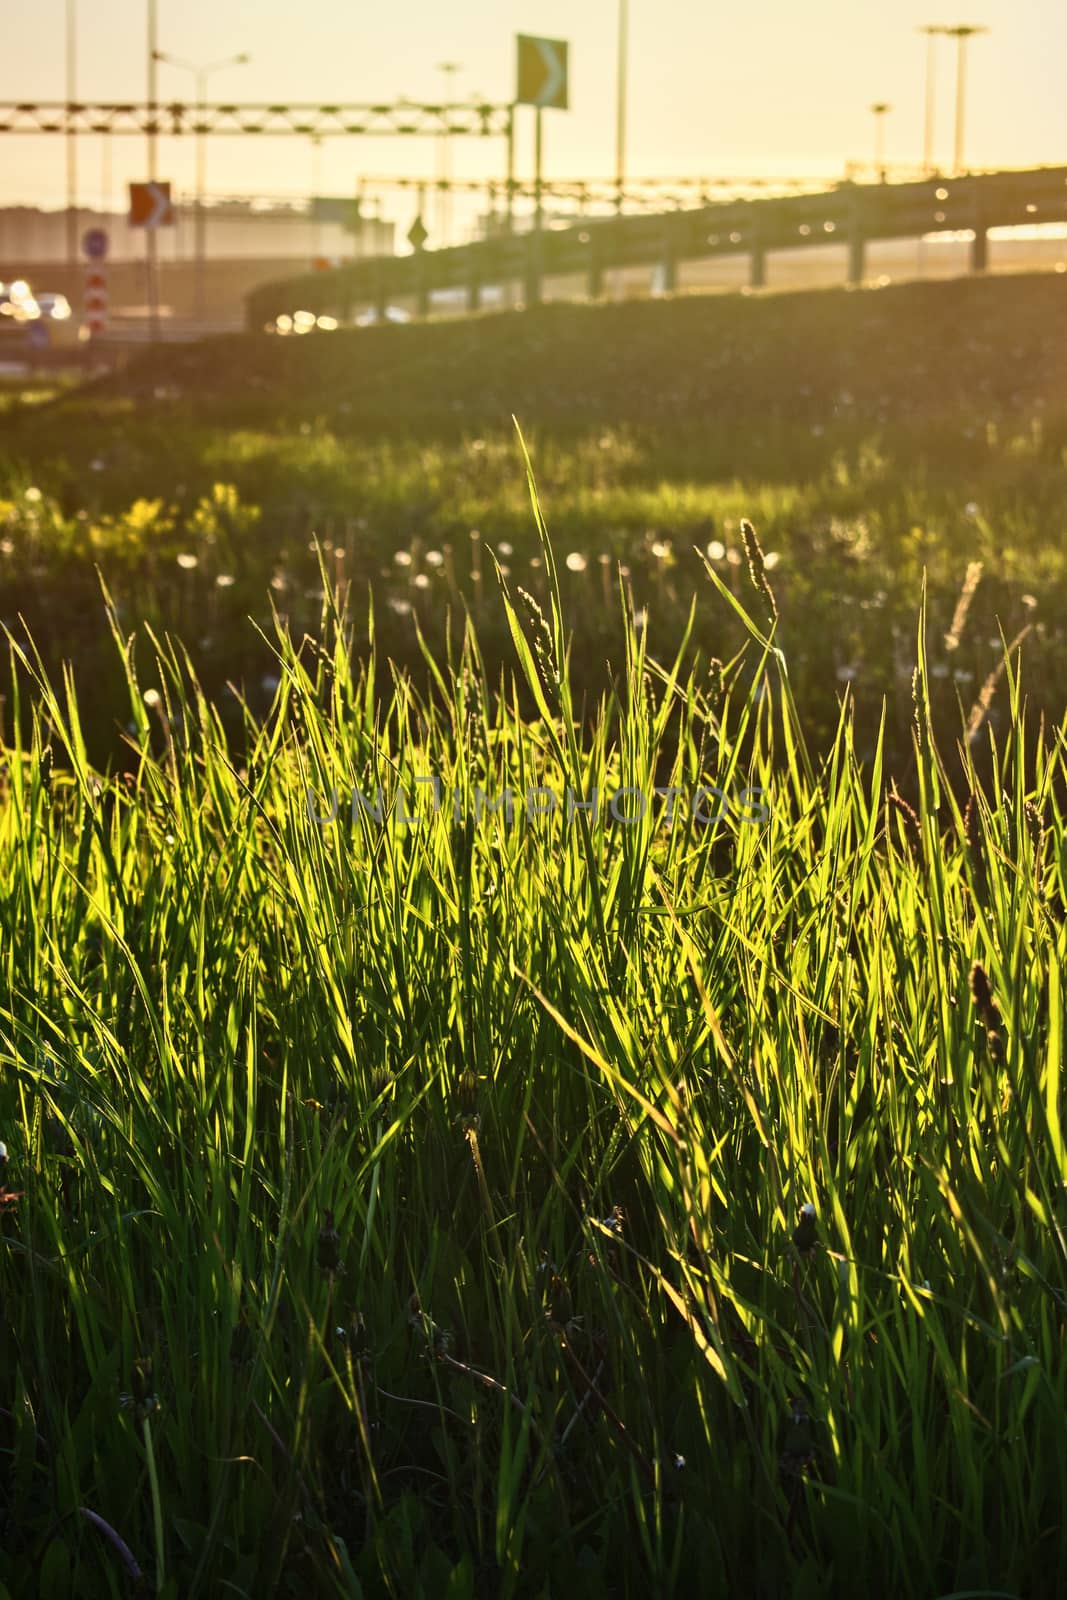 The evening sun illuminates the surrounding highway and grass growing next to the road